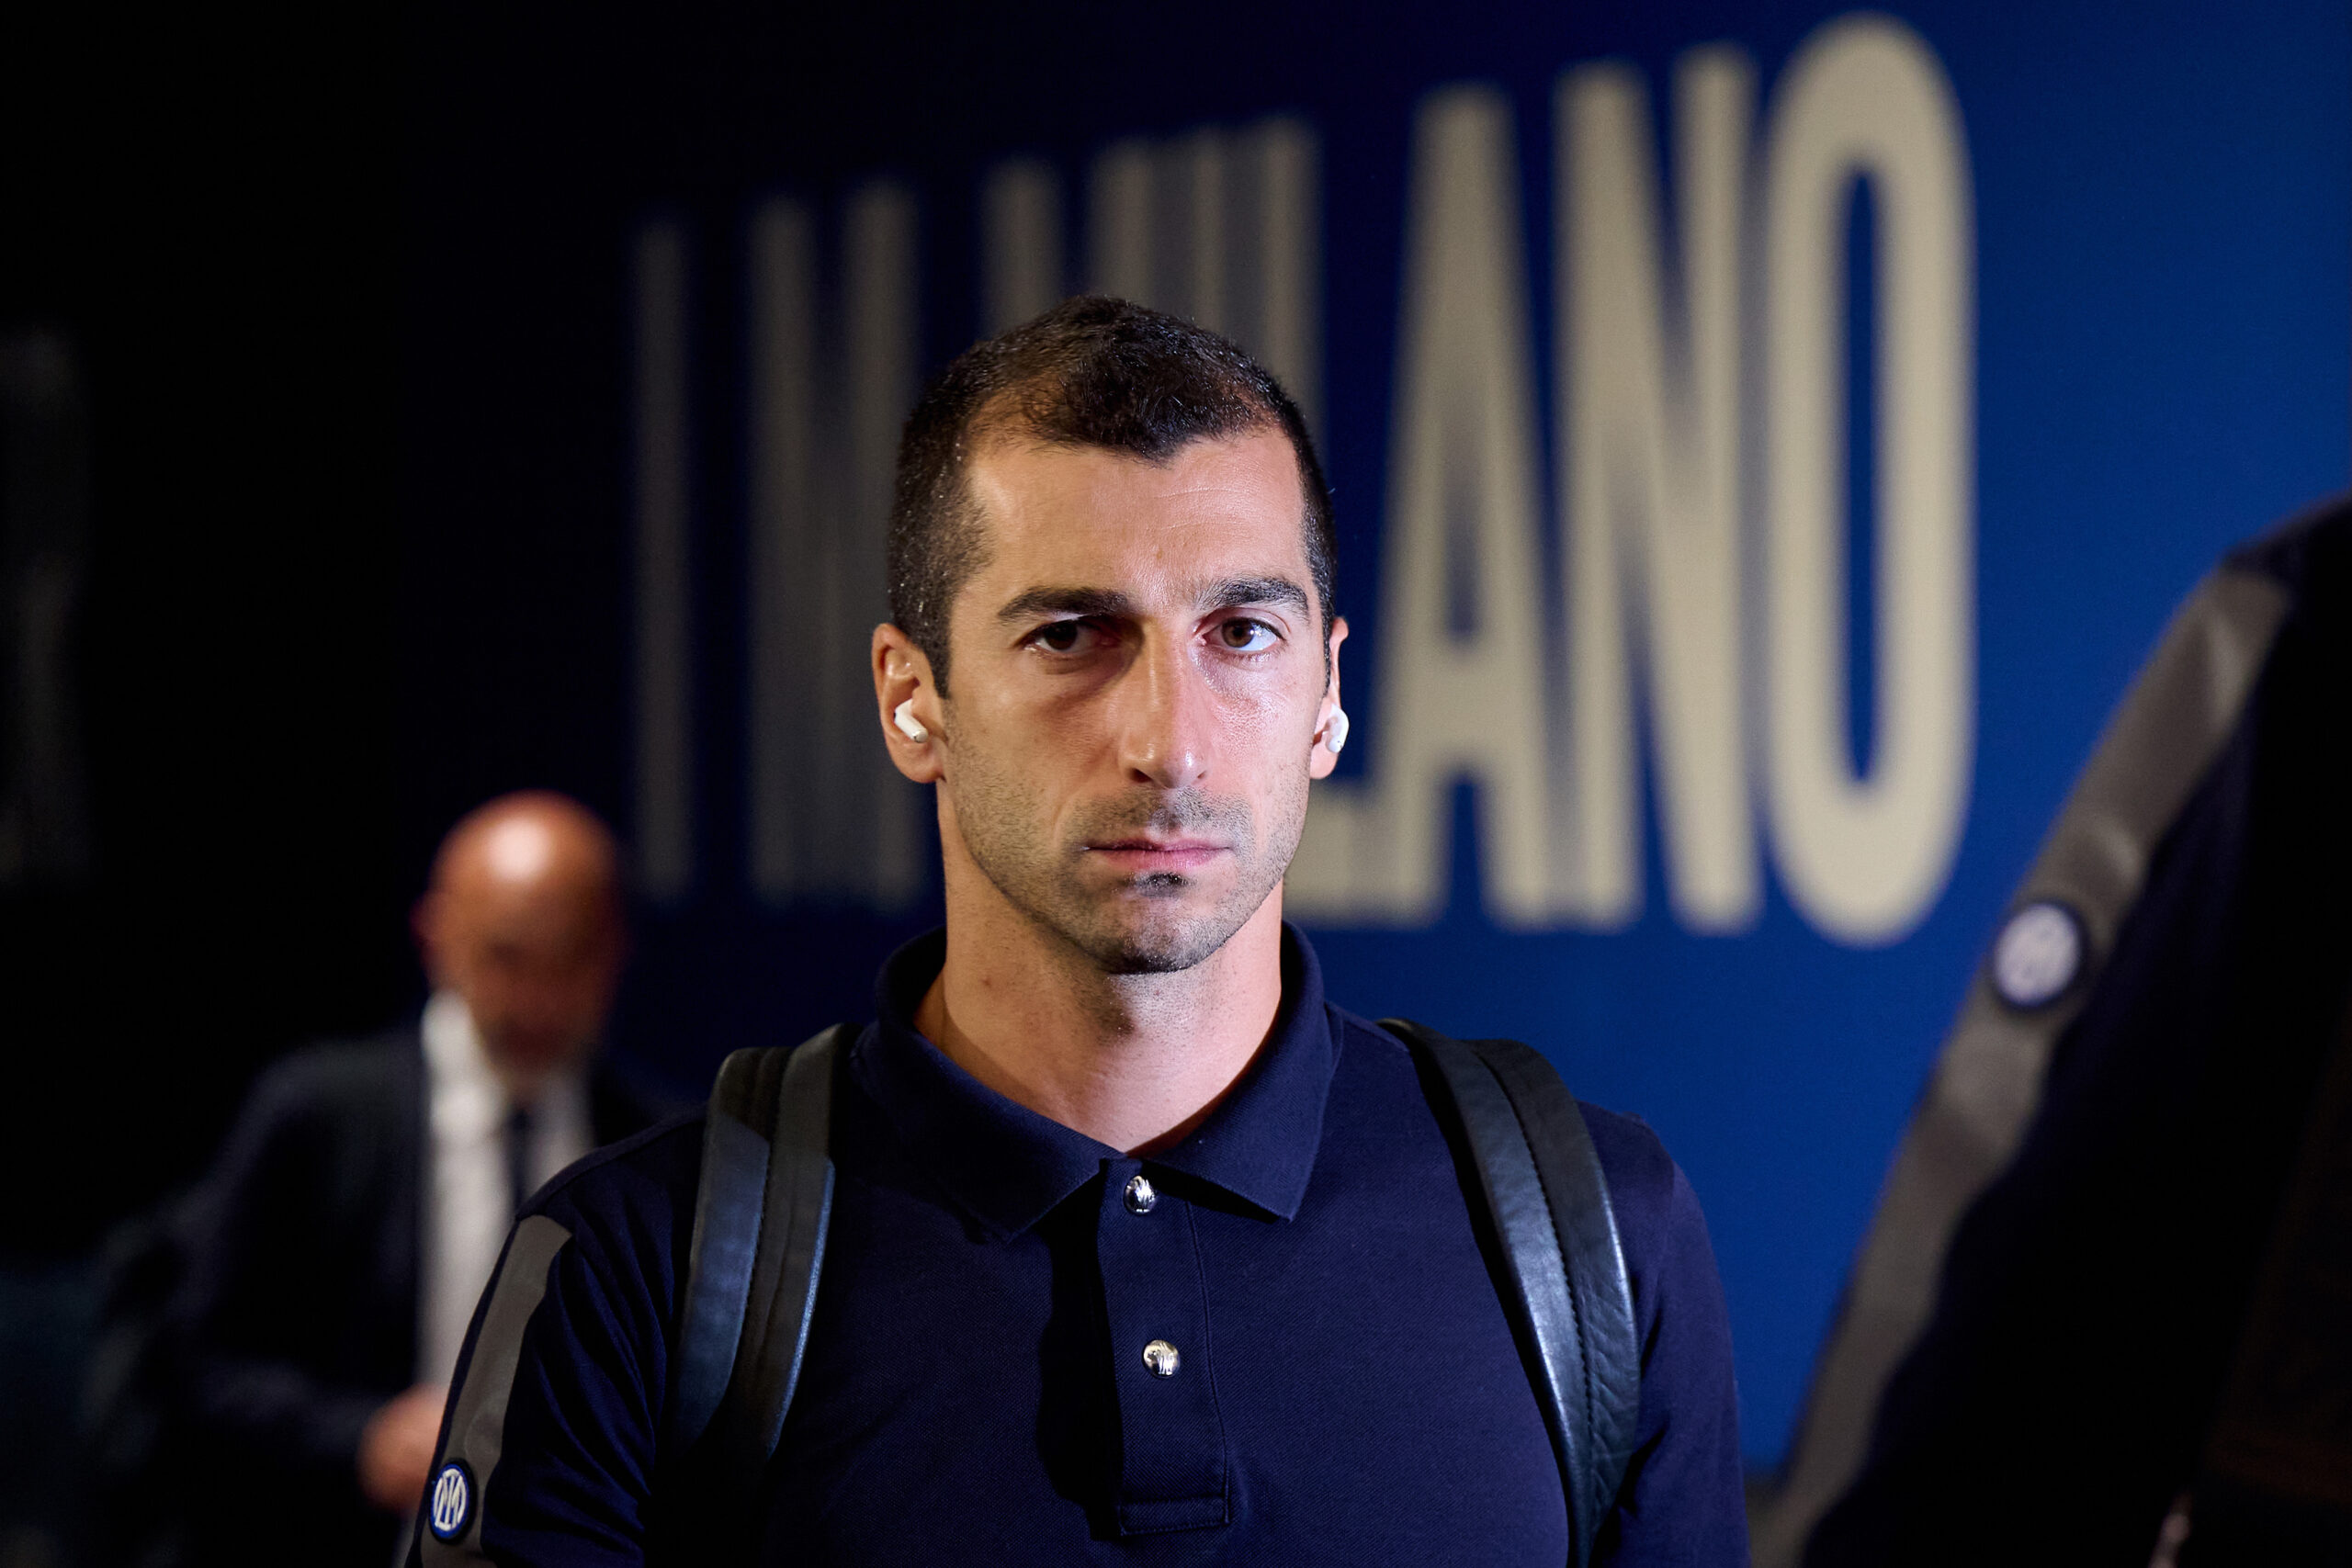 Inter have been bargaining with Henrikh Mkhitaryan in recent months, but the agreement hasn’t arrived yet despite their urgency.